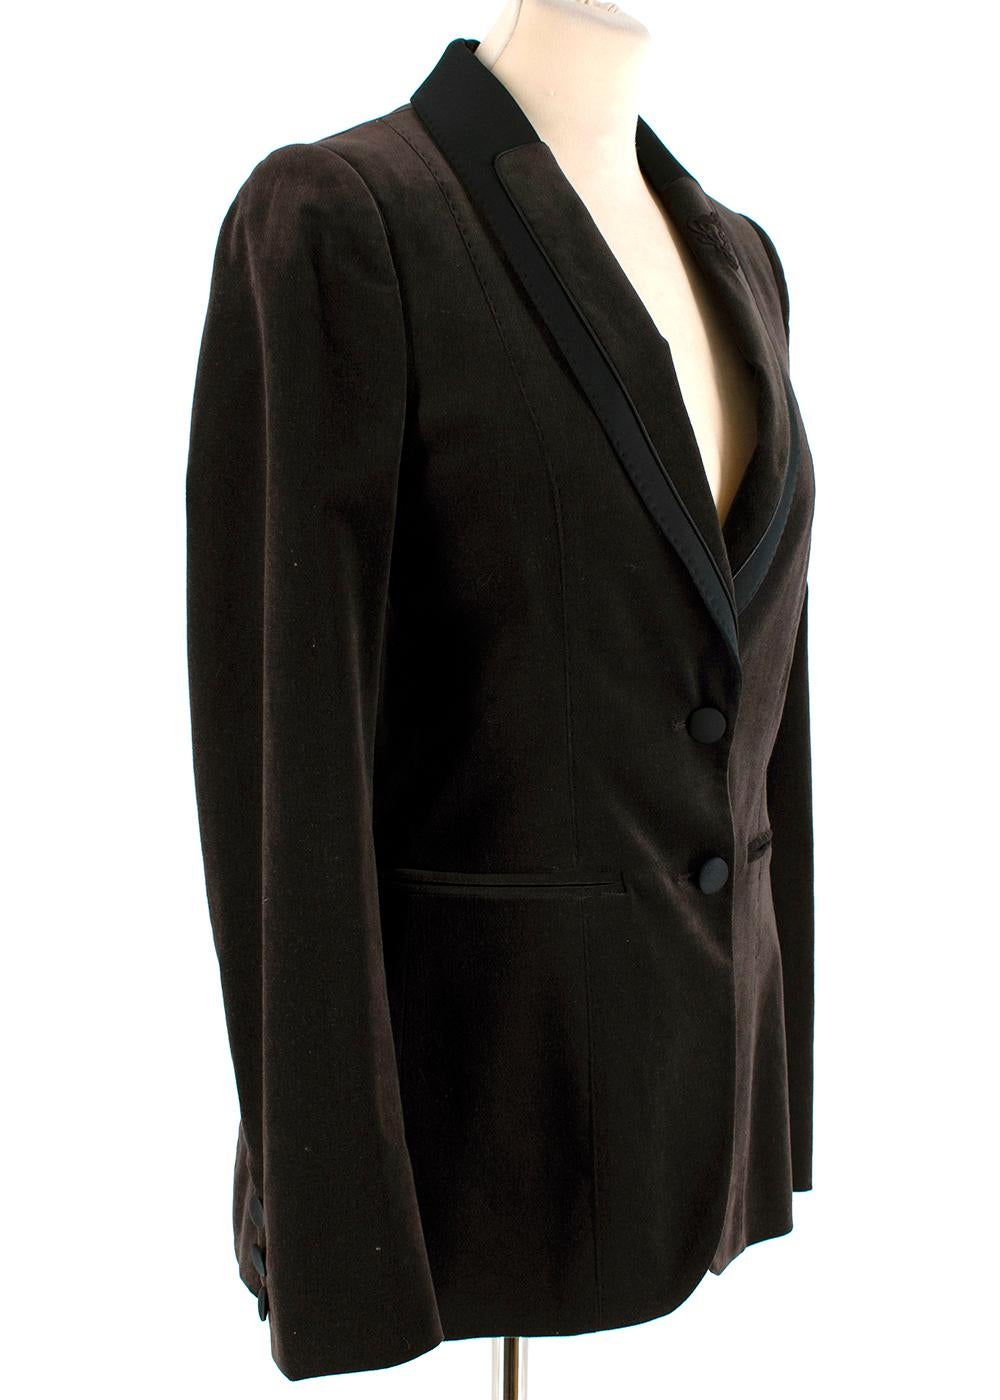 Gucci Espresso Brown Velvet Single Breasted Blazer

- Dark brown velvet blazer
- Single breasted design 
- Embroidered 'G' detailing on lapel 
- Satin lapels and covered buttons 
- Buttoned sleeves
- False front welt pockets 
- Back vent 
- Black